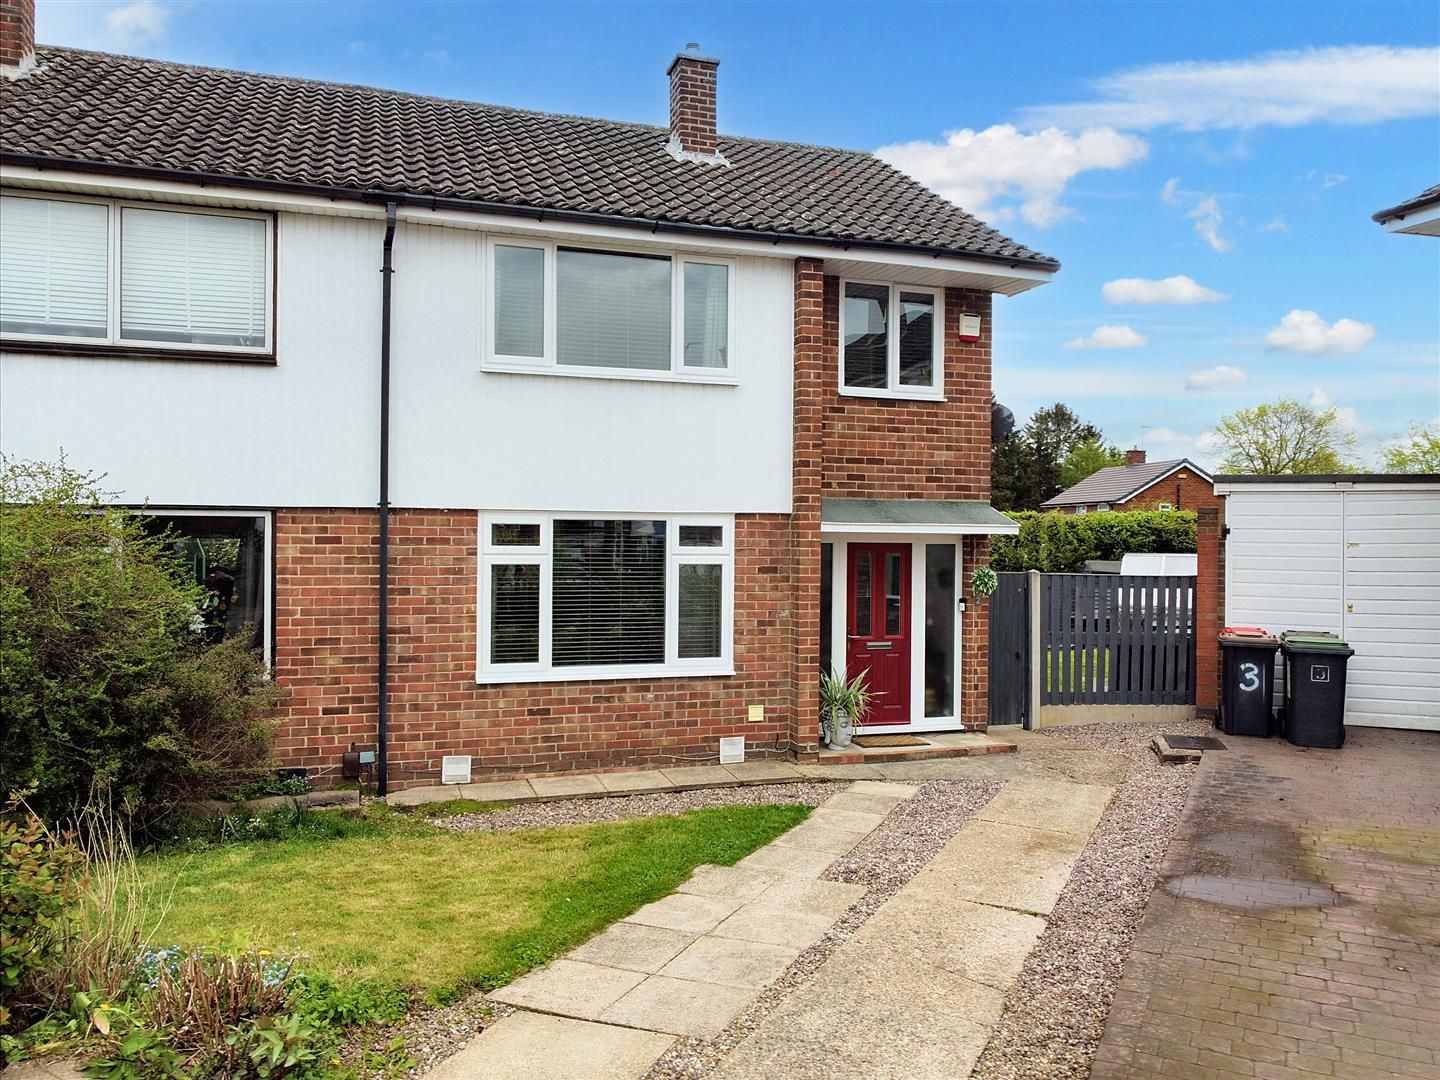 Stoneleigh Close, Chilwell, Nottingham, NG9 5EX